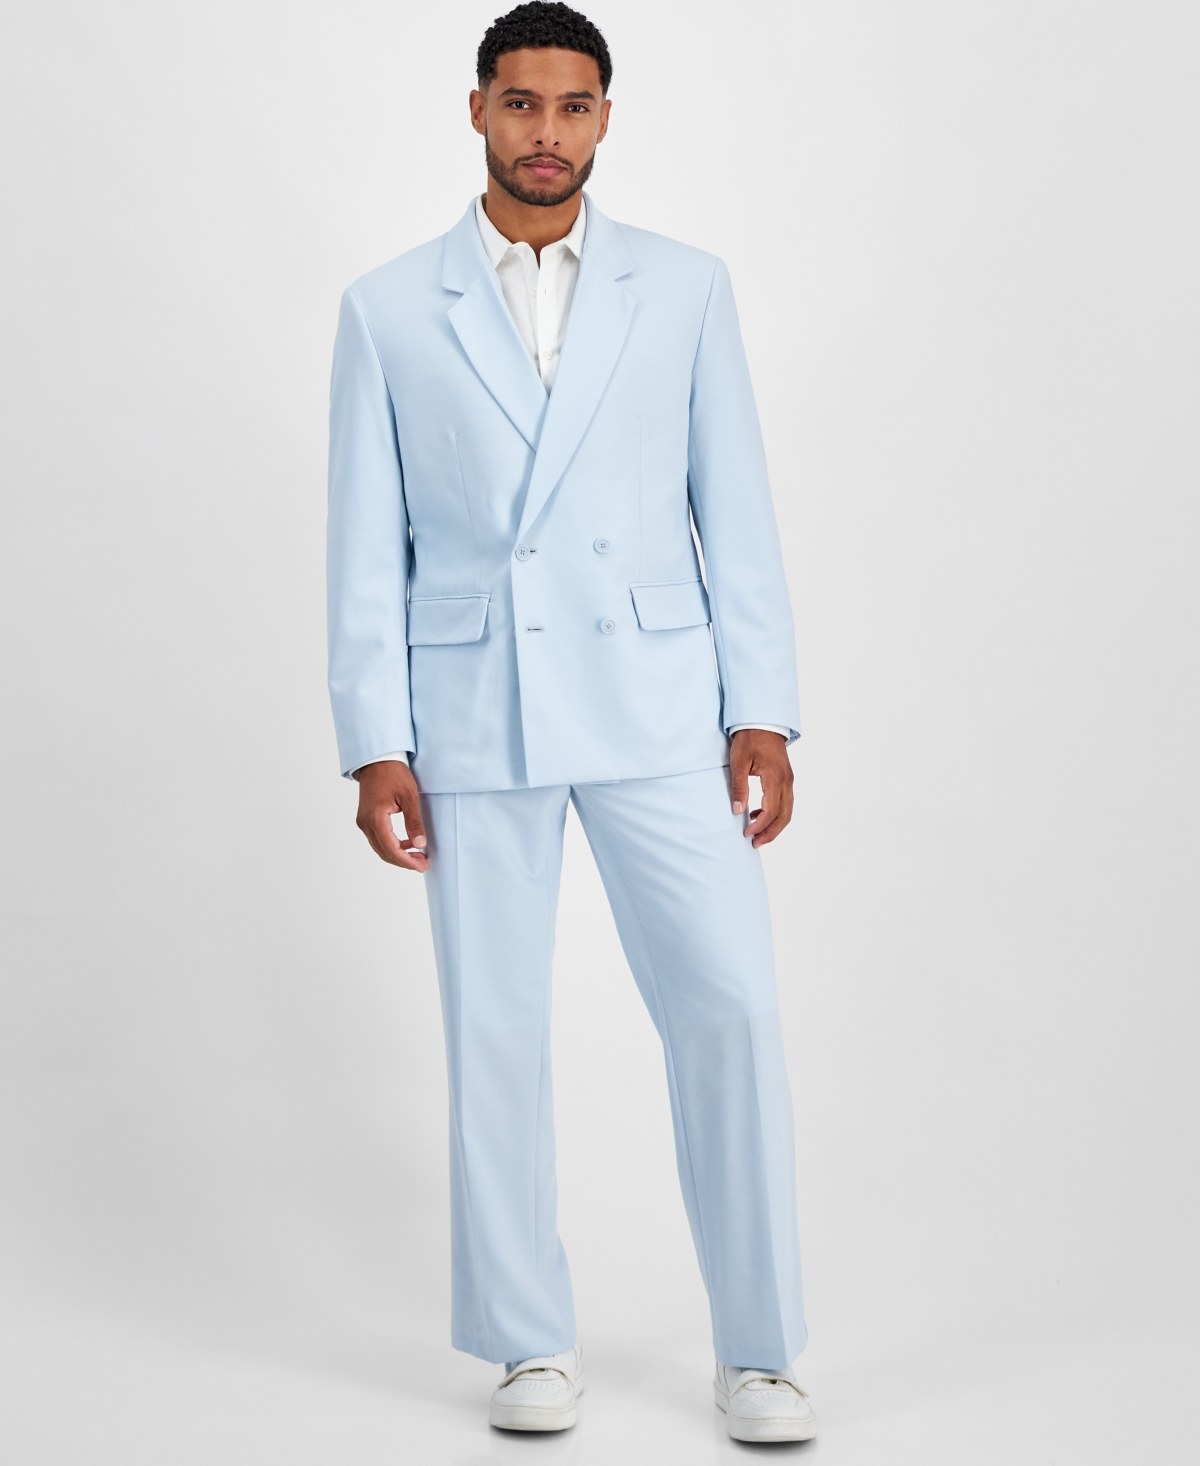 Men's Double-Breasted Blazer, Created for Macy's - Dream Cloud Blu